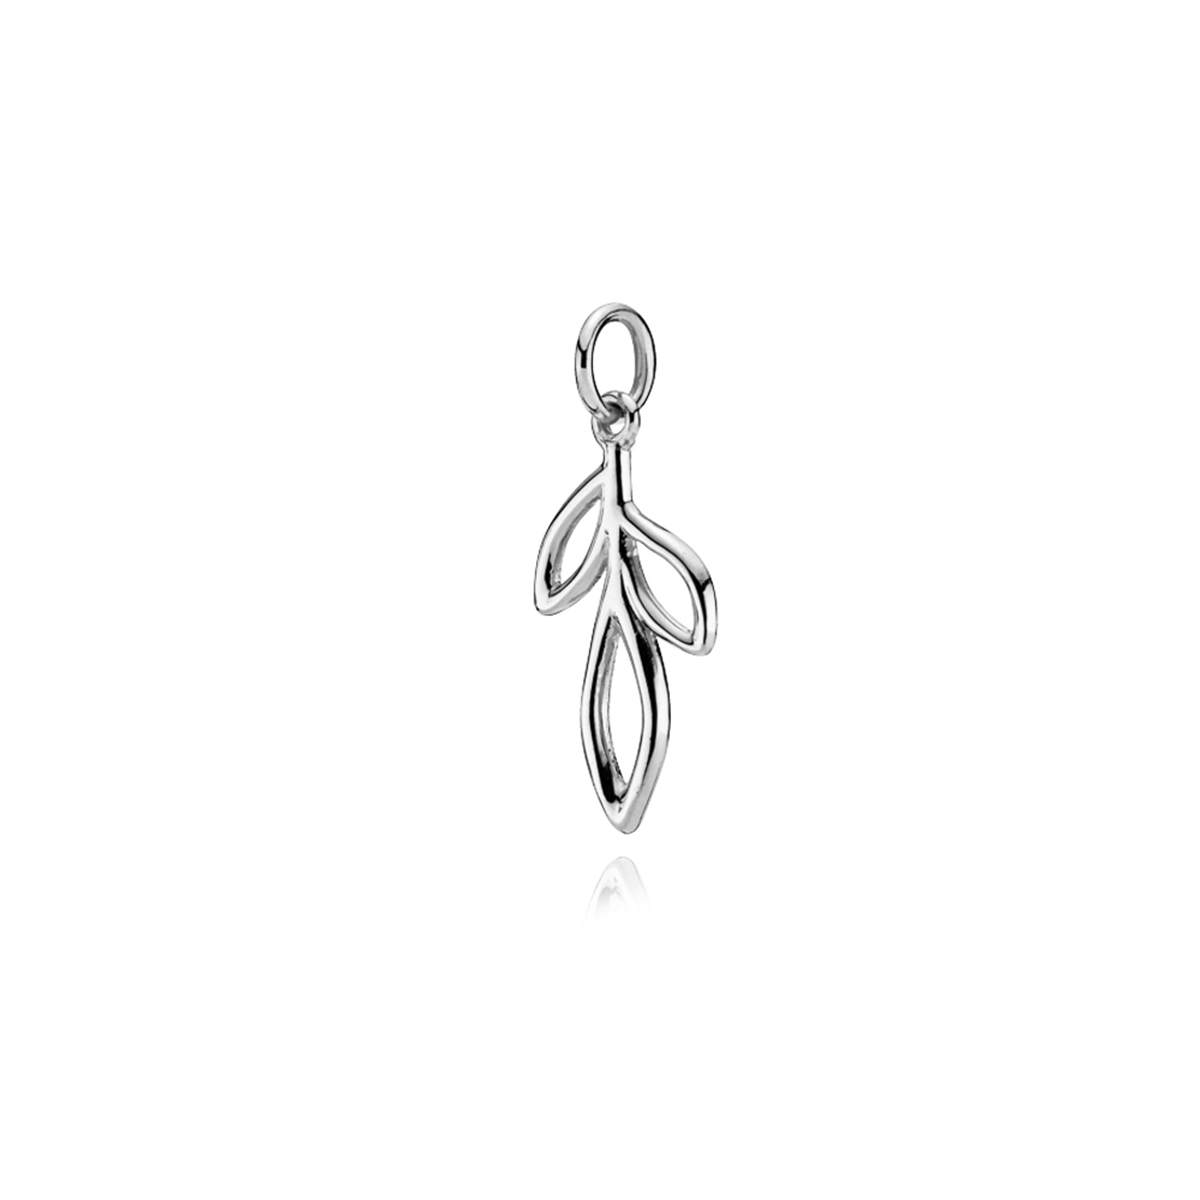 Dreamy Pendant from Izabel Camille in Silver Sterling 925